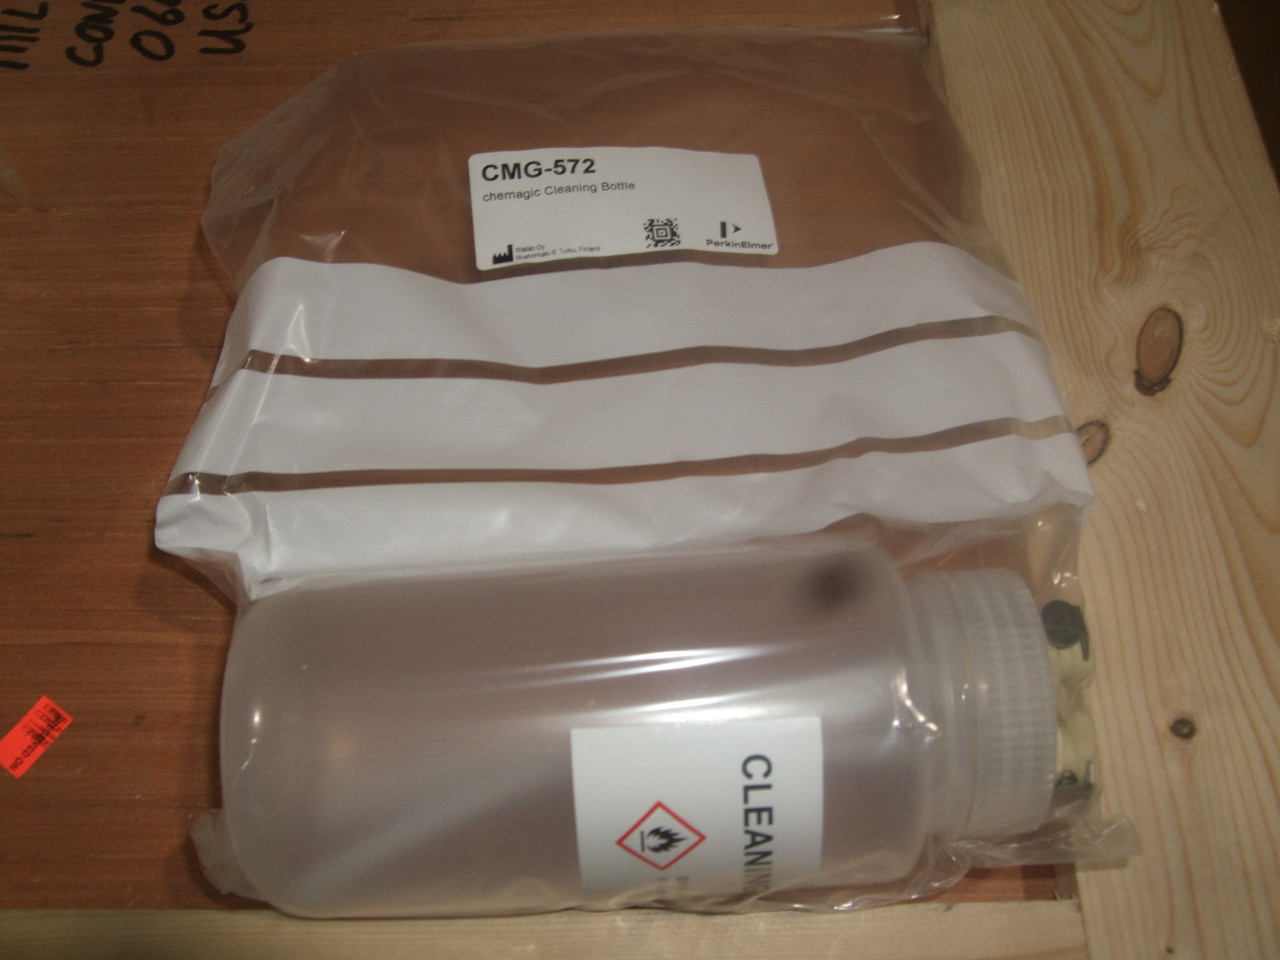 (Pack of 2) PerkinElmer CMG-572 Chemagic Cleaning Bottle